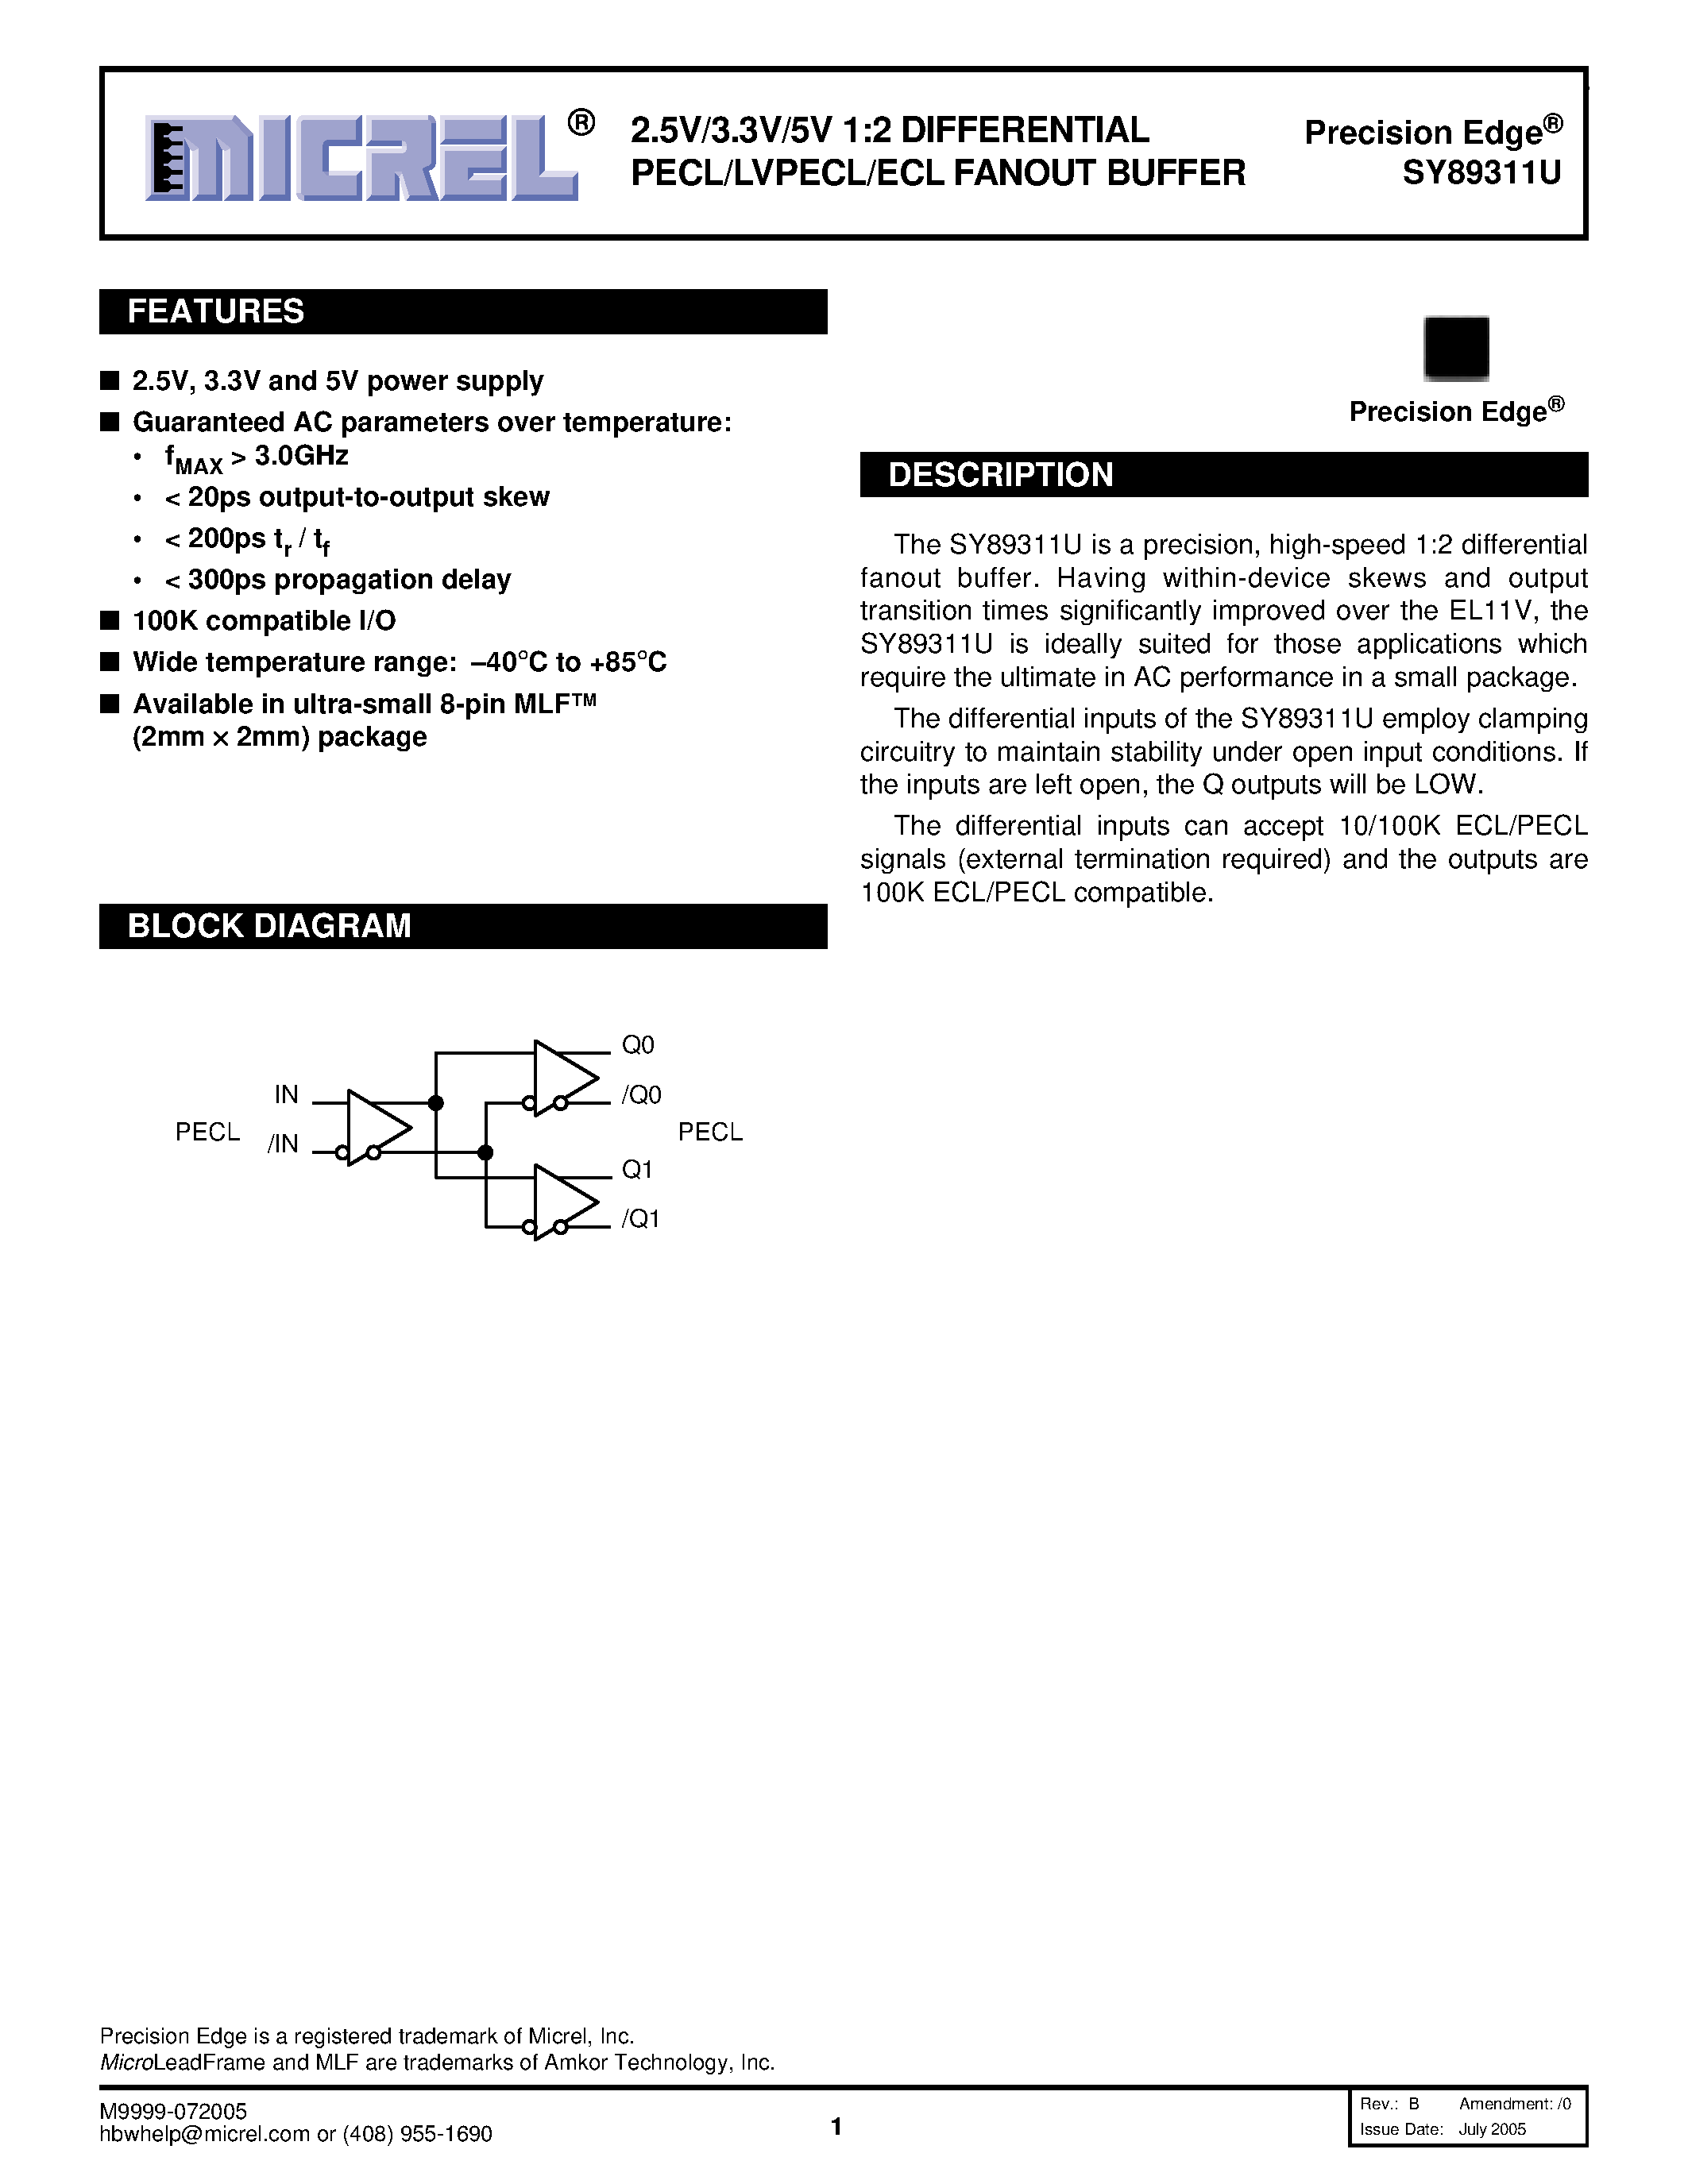 Datasheet SY89311U - 2.5V/3.3V/5V 1:2 DIFFERENTIAL PECL/LVPECL/ECL FANOUT BUFFER page 1